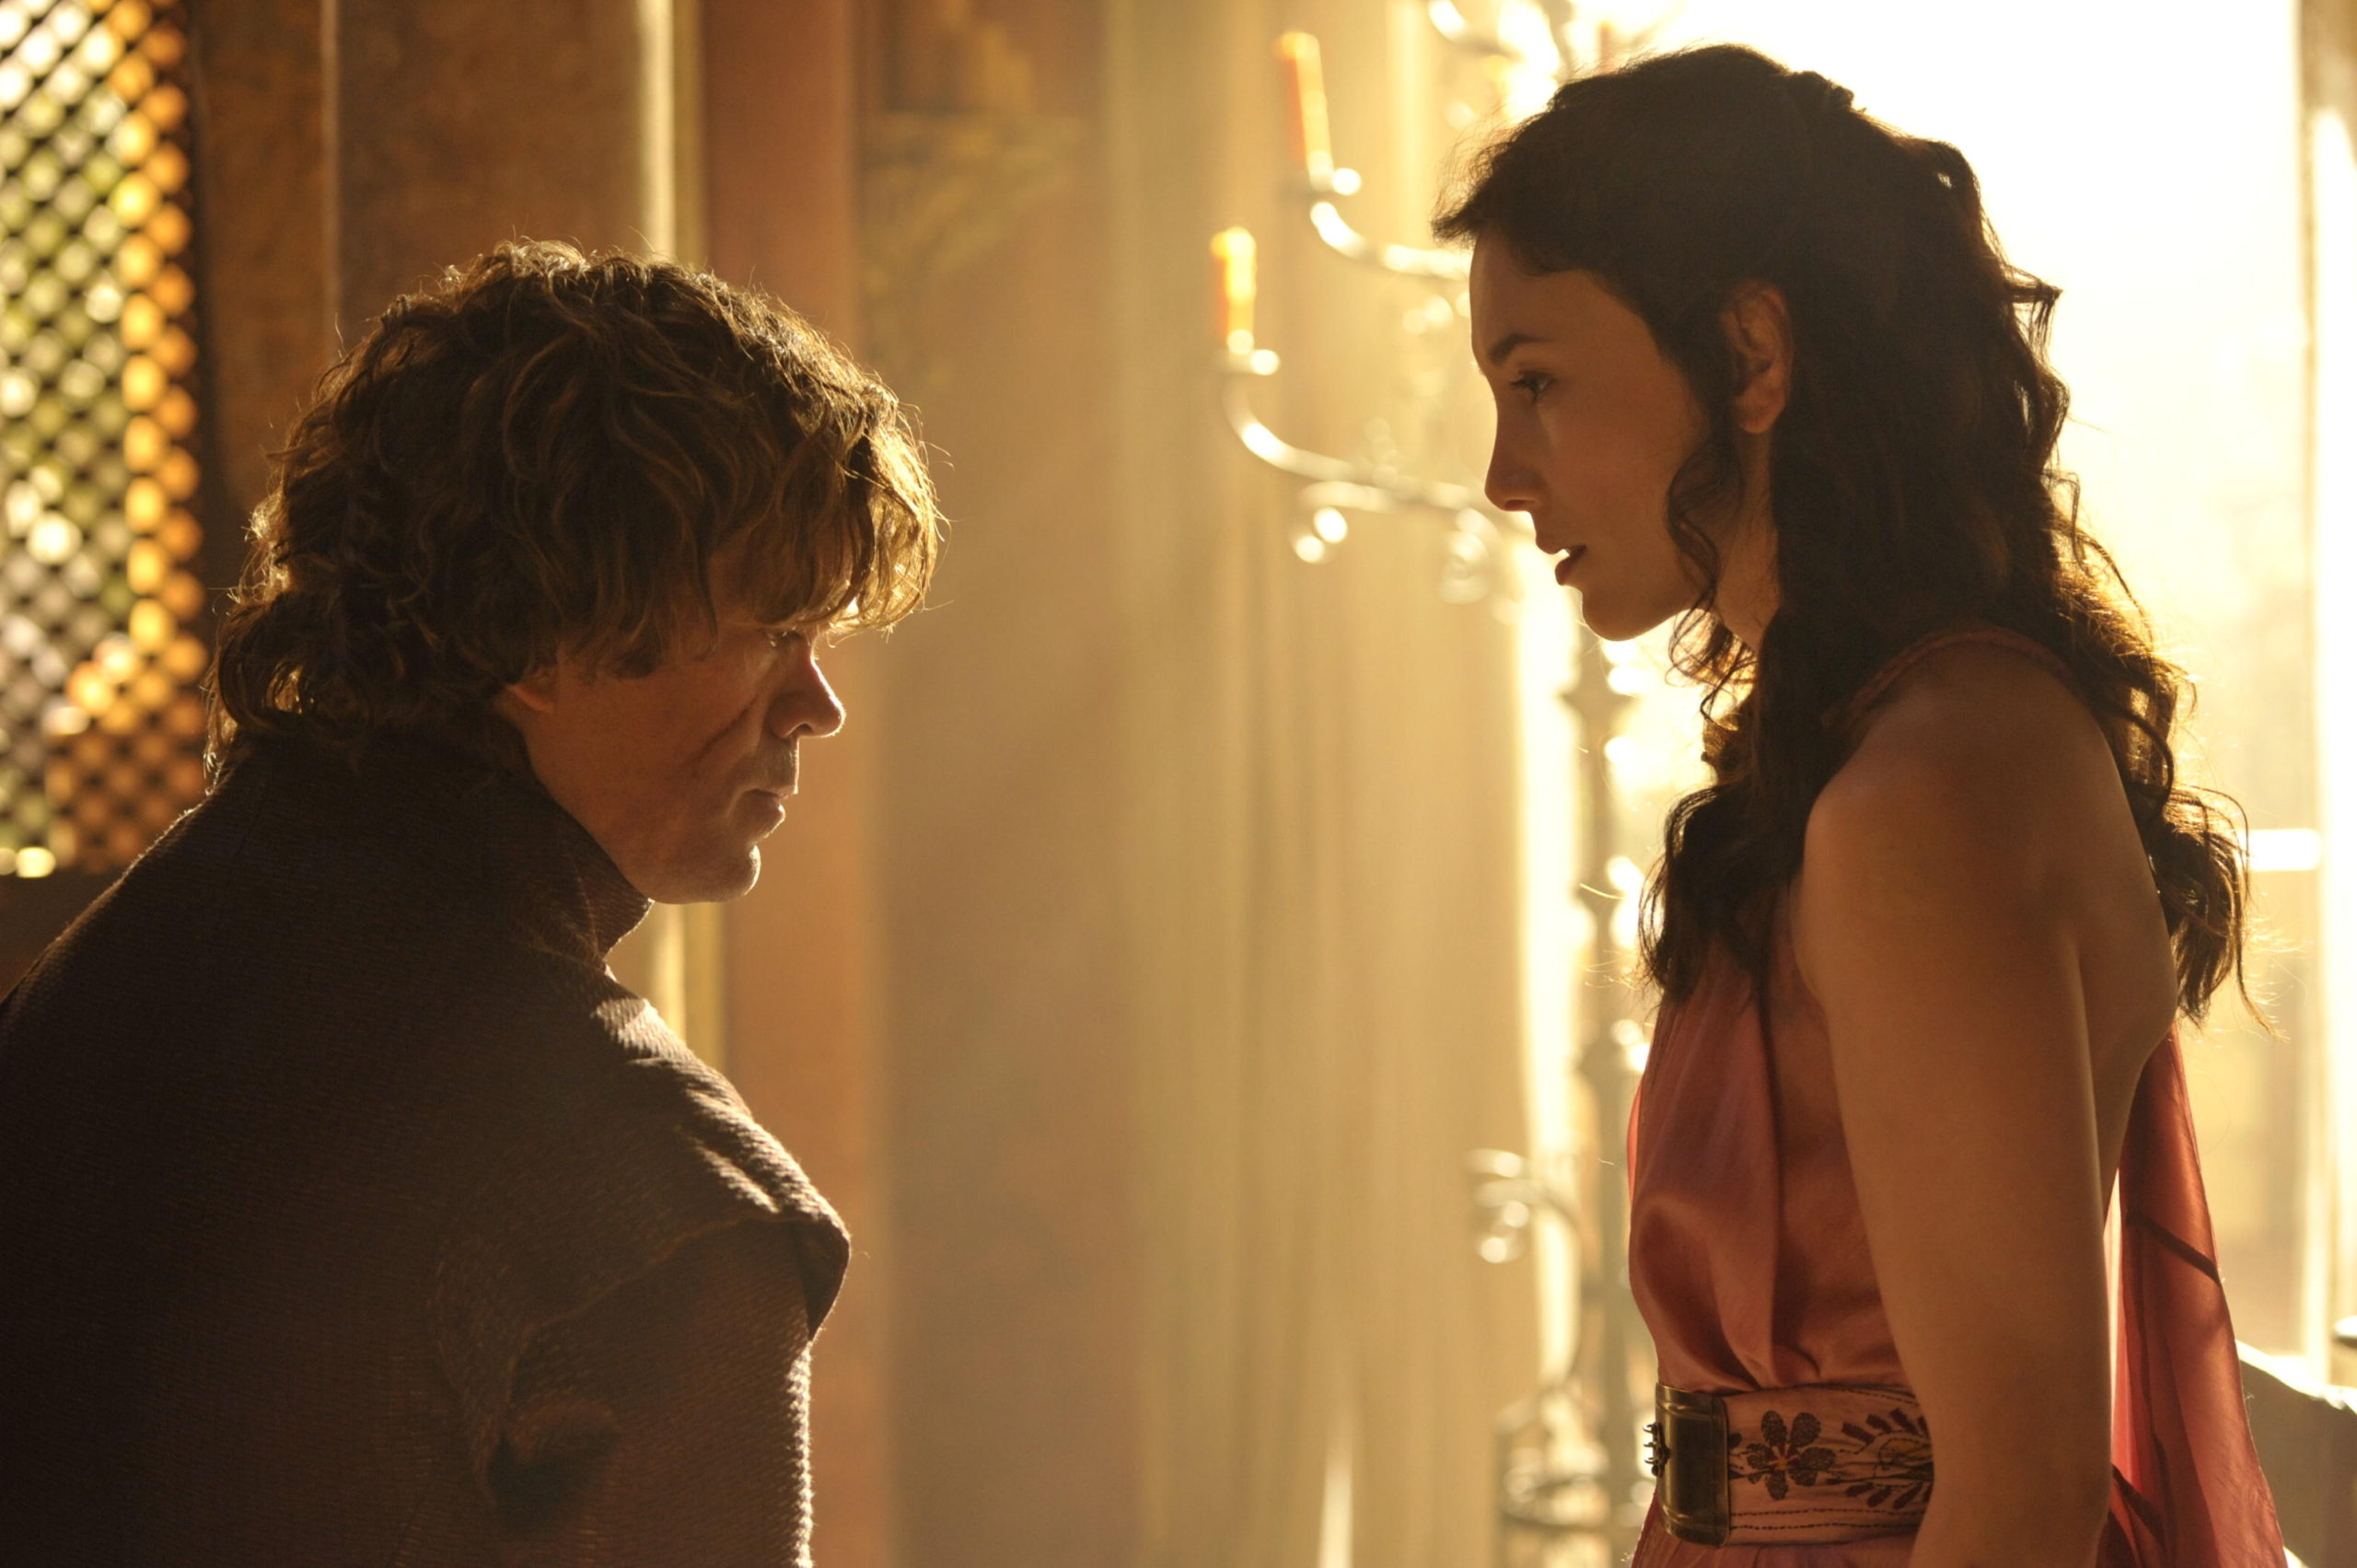 Tyrion and Shae stand together in their bedroom, looking at one another.